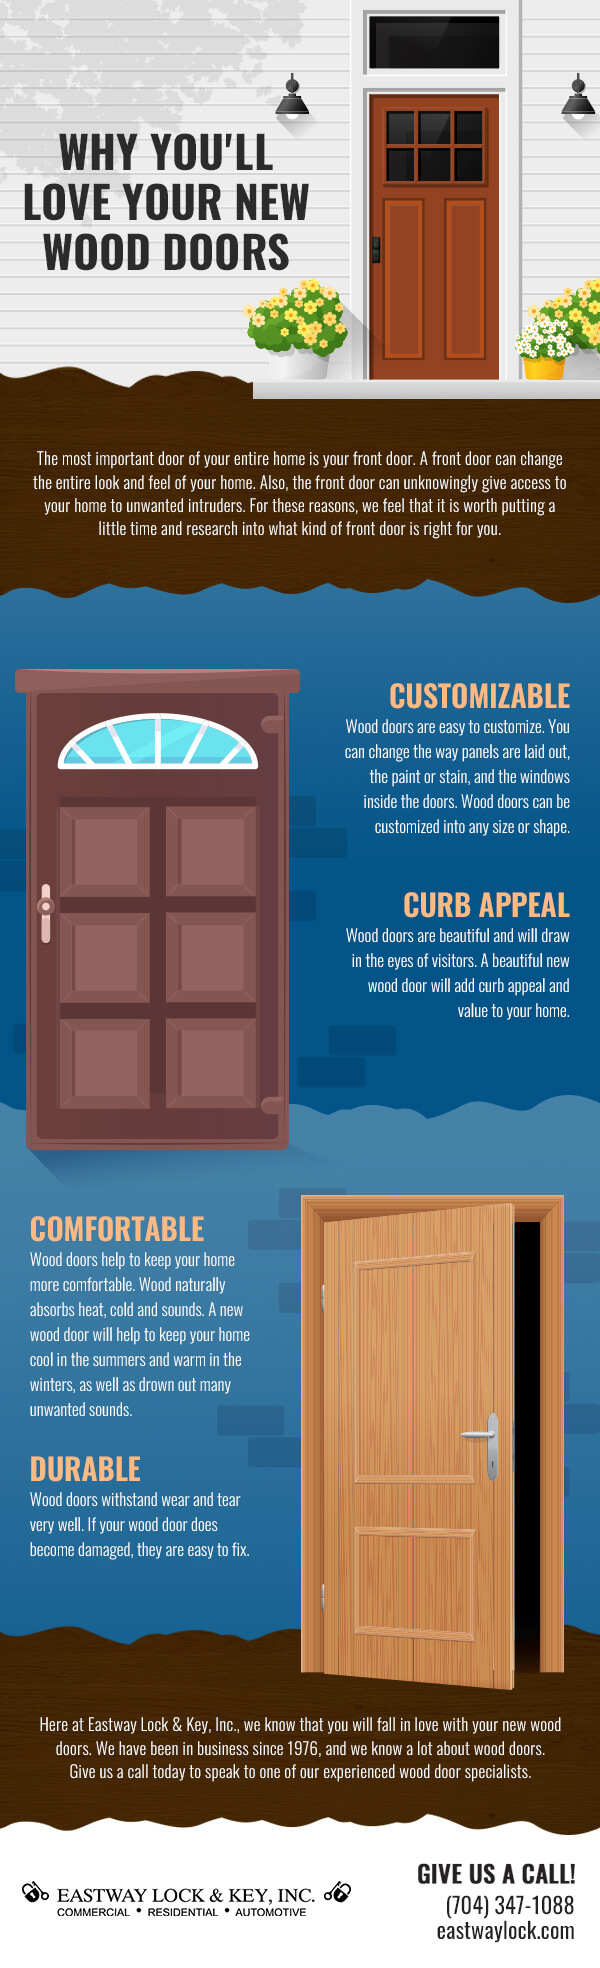 Why You'll Love Your New Wood Doors